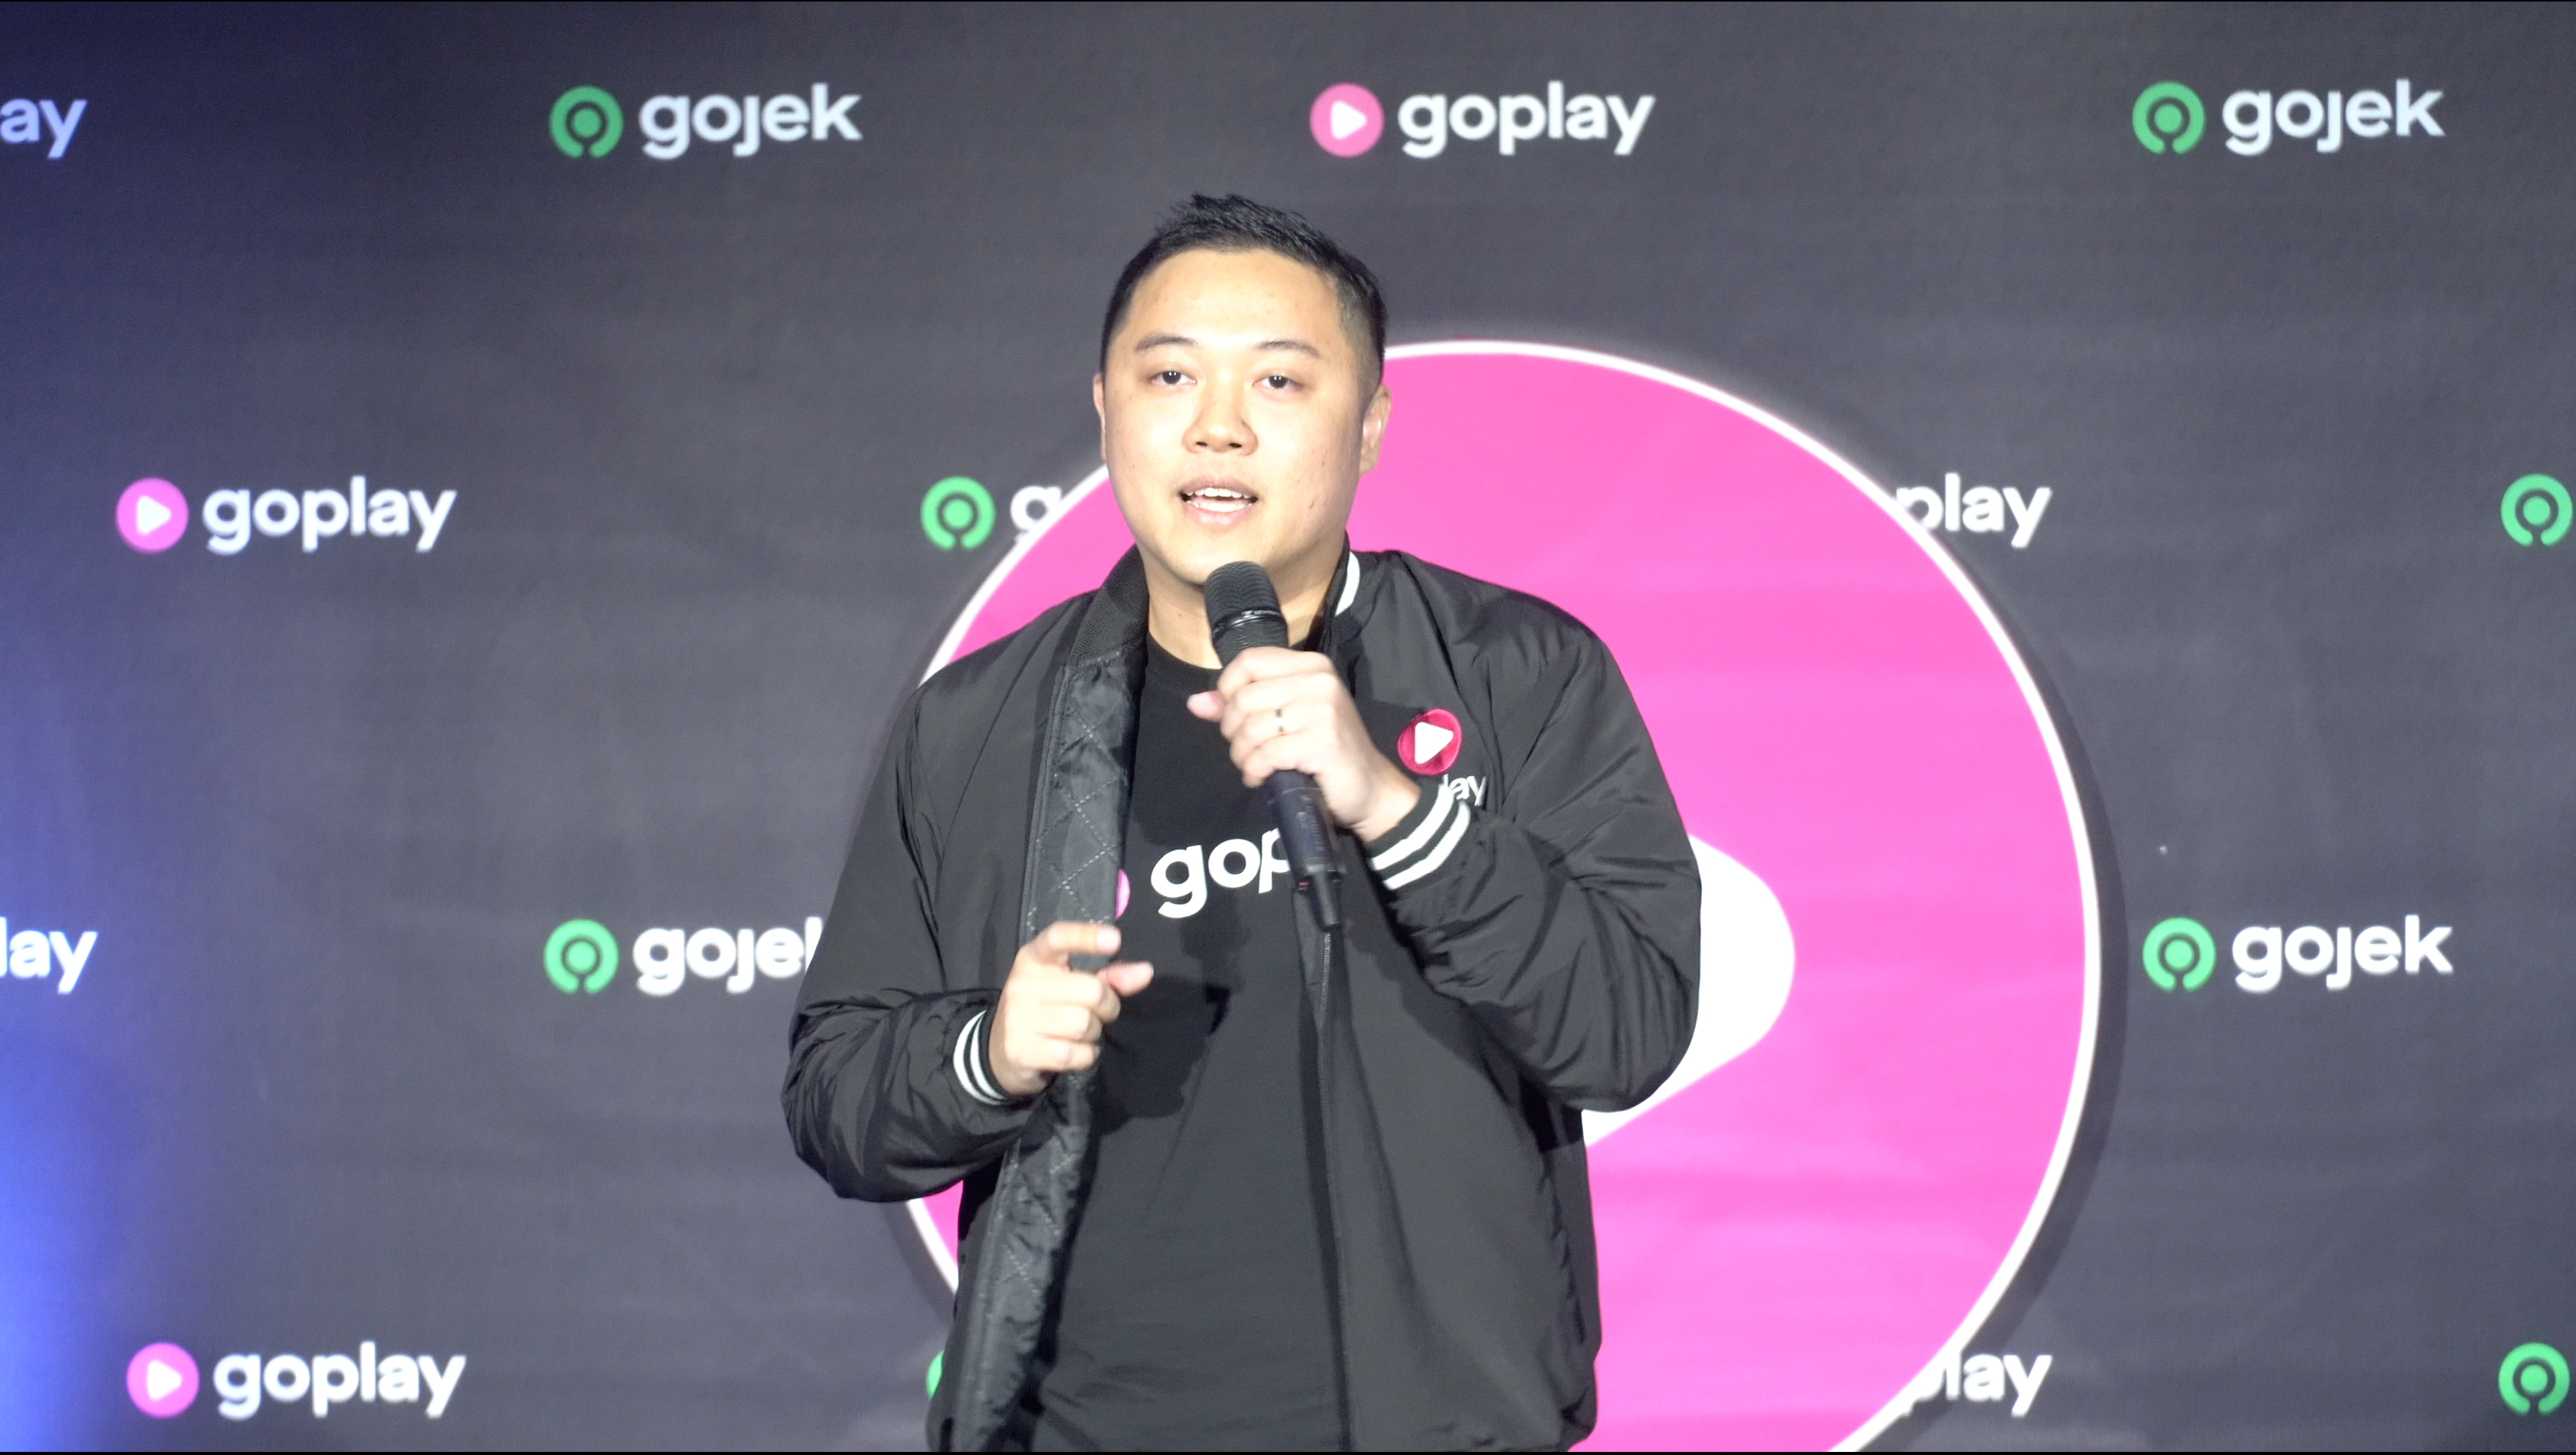 Gojek’s GoPlay on how to create a sustainable business and promote Indonesian movies: Q&A with GoPlay CEO Edy Sulistyo